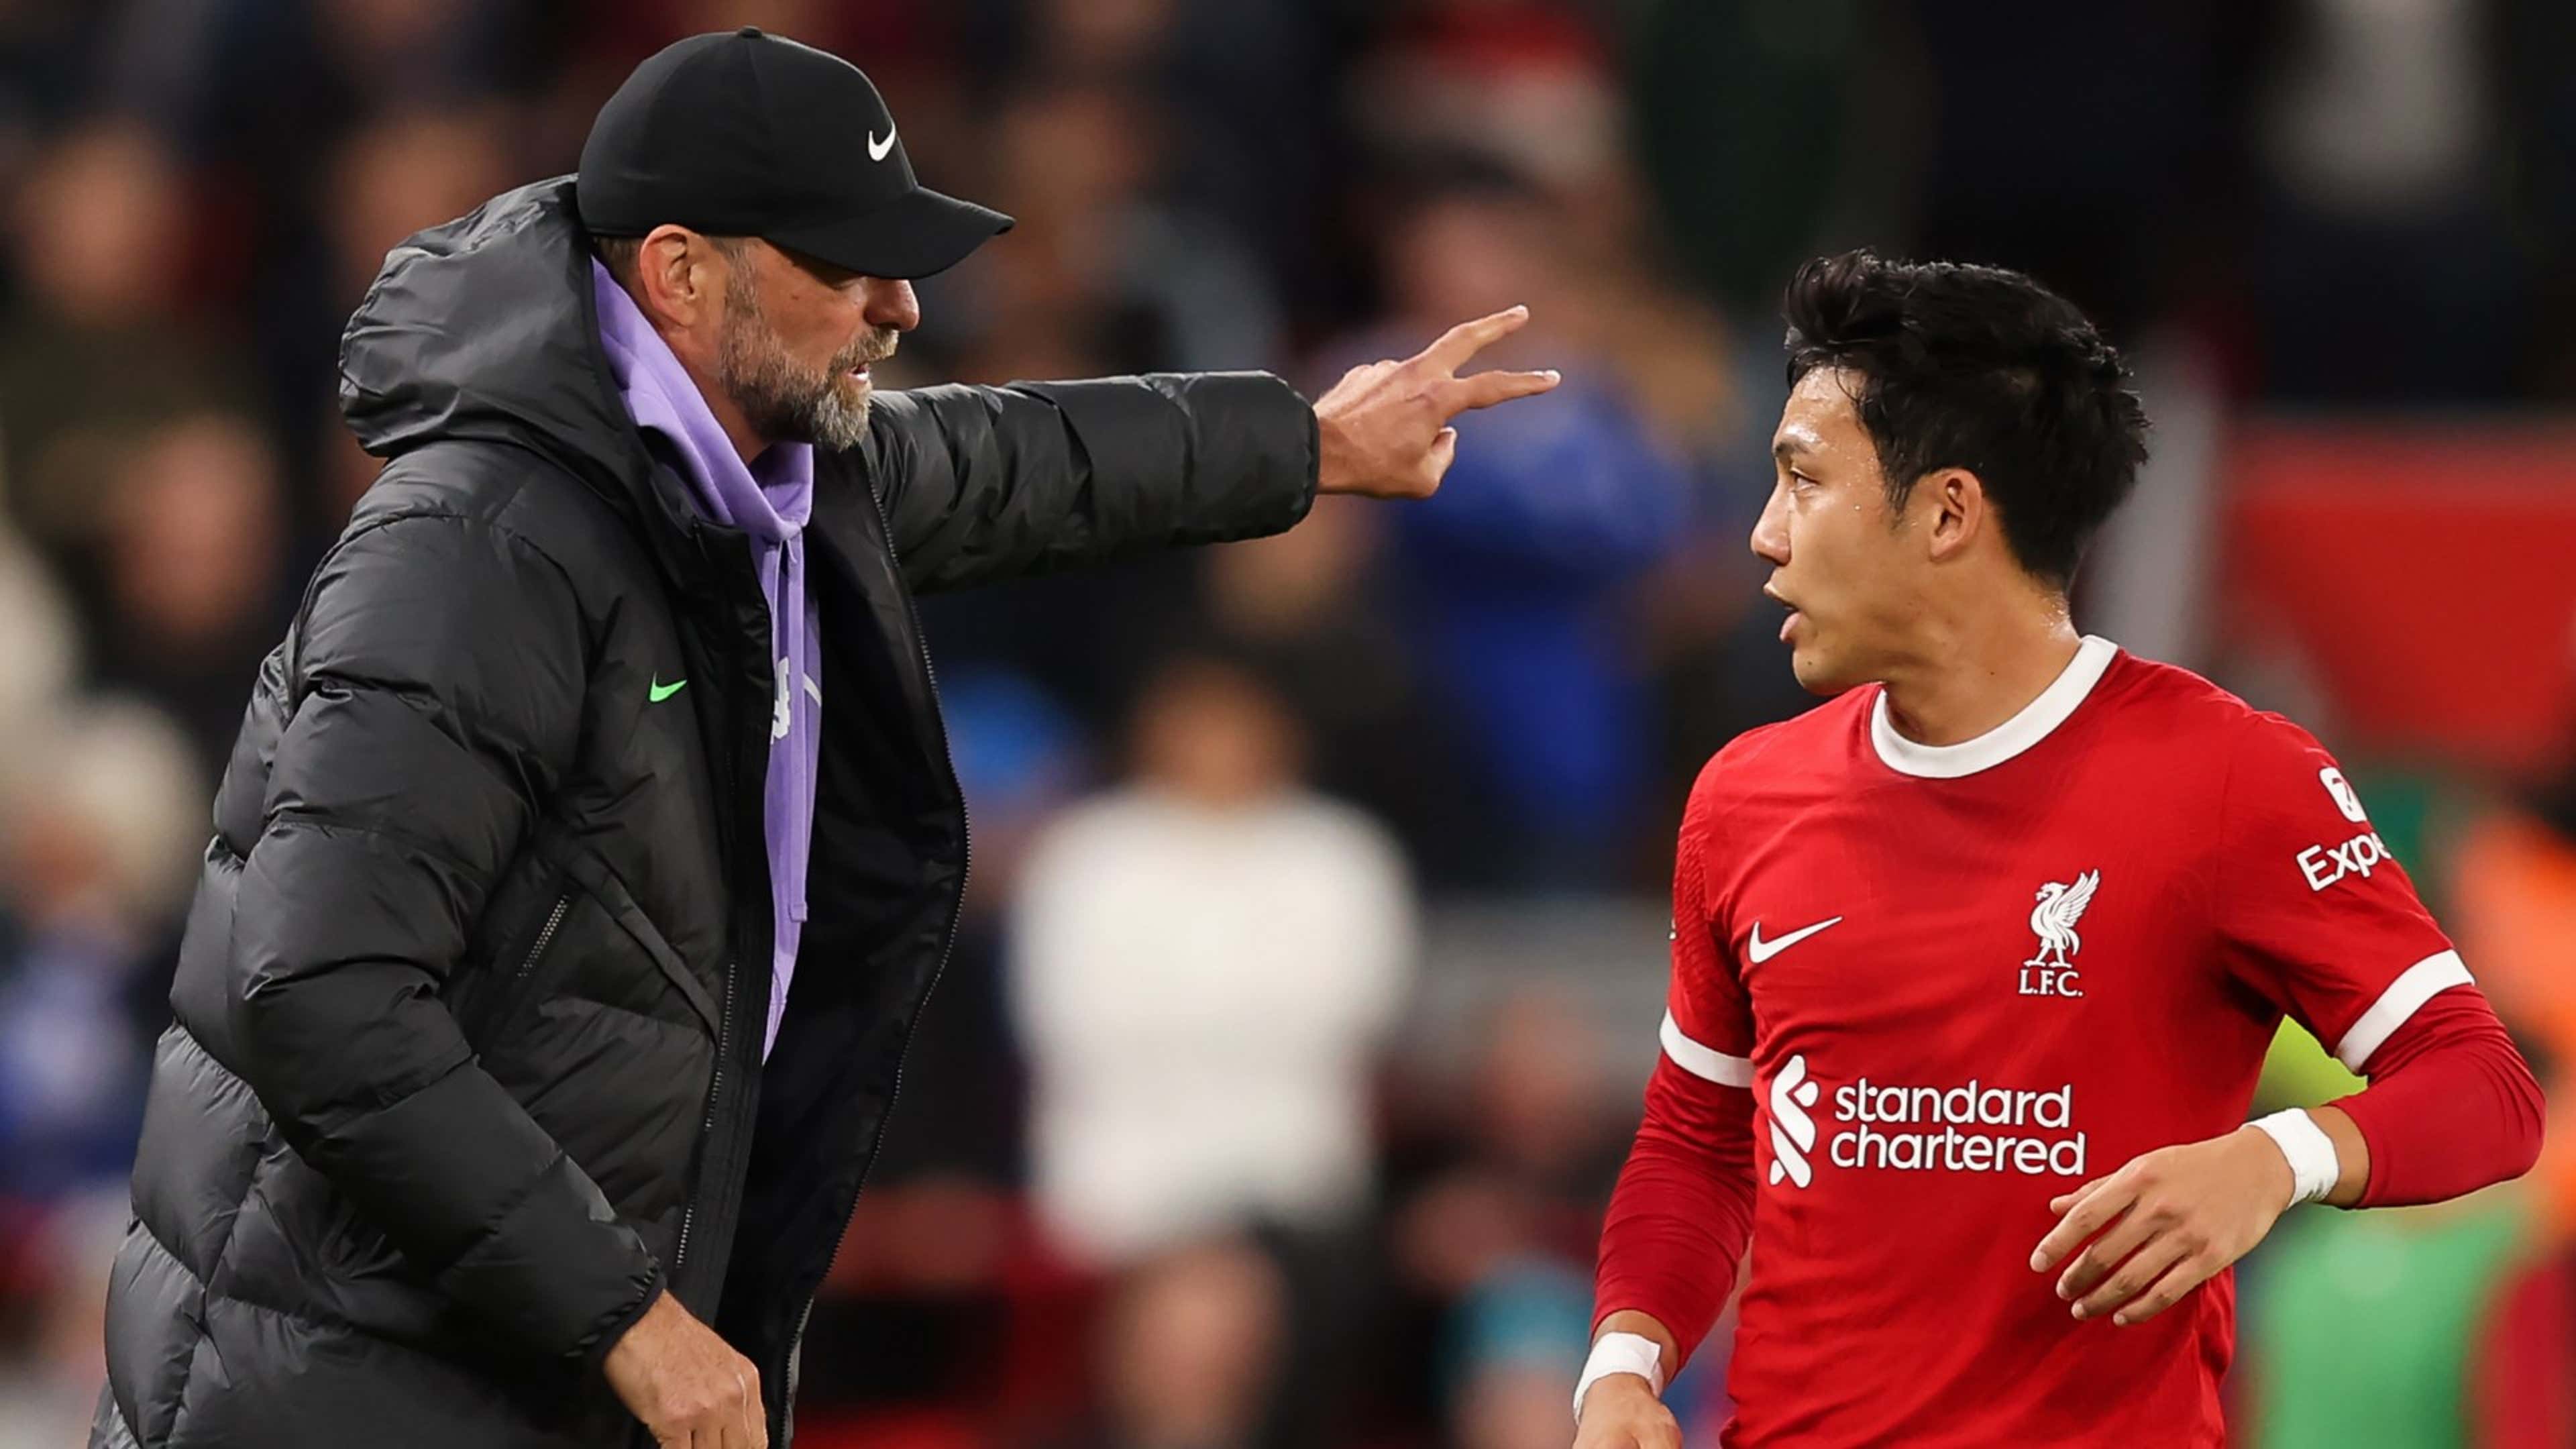 Liverpool boss Jurgen Klopp expects a fully-fit Wataru Endo ahead of Manchester United clash. 